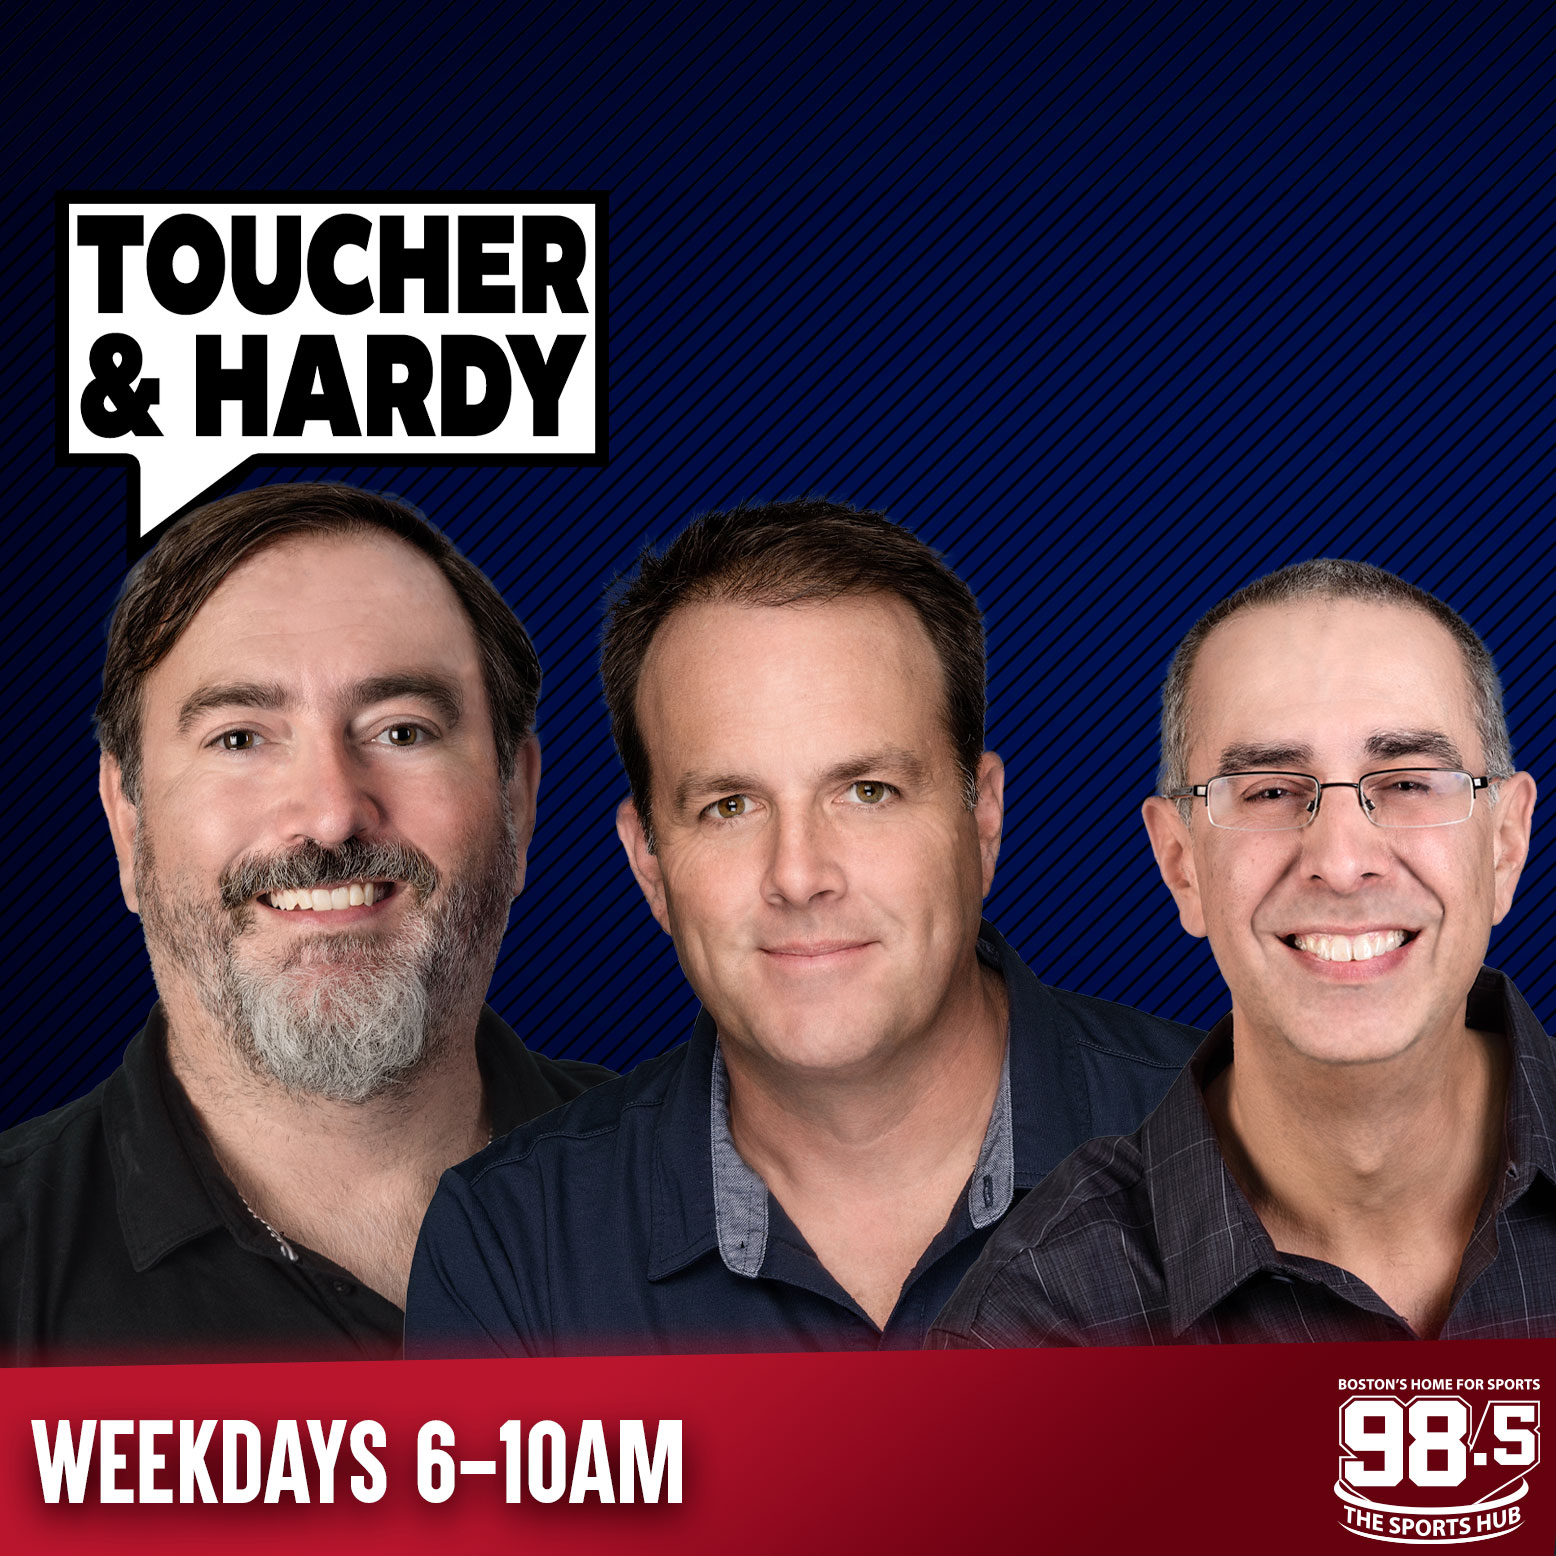 It’s ALL POSITIVE with Hardy, Johnston & Dan Roche | Tanner Houck pitches complete-game shutout | NBA bans Raptors' Jontay Porter for gambling - 4/18 (Hour 1)